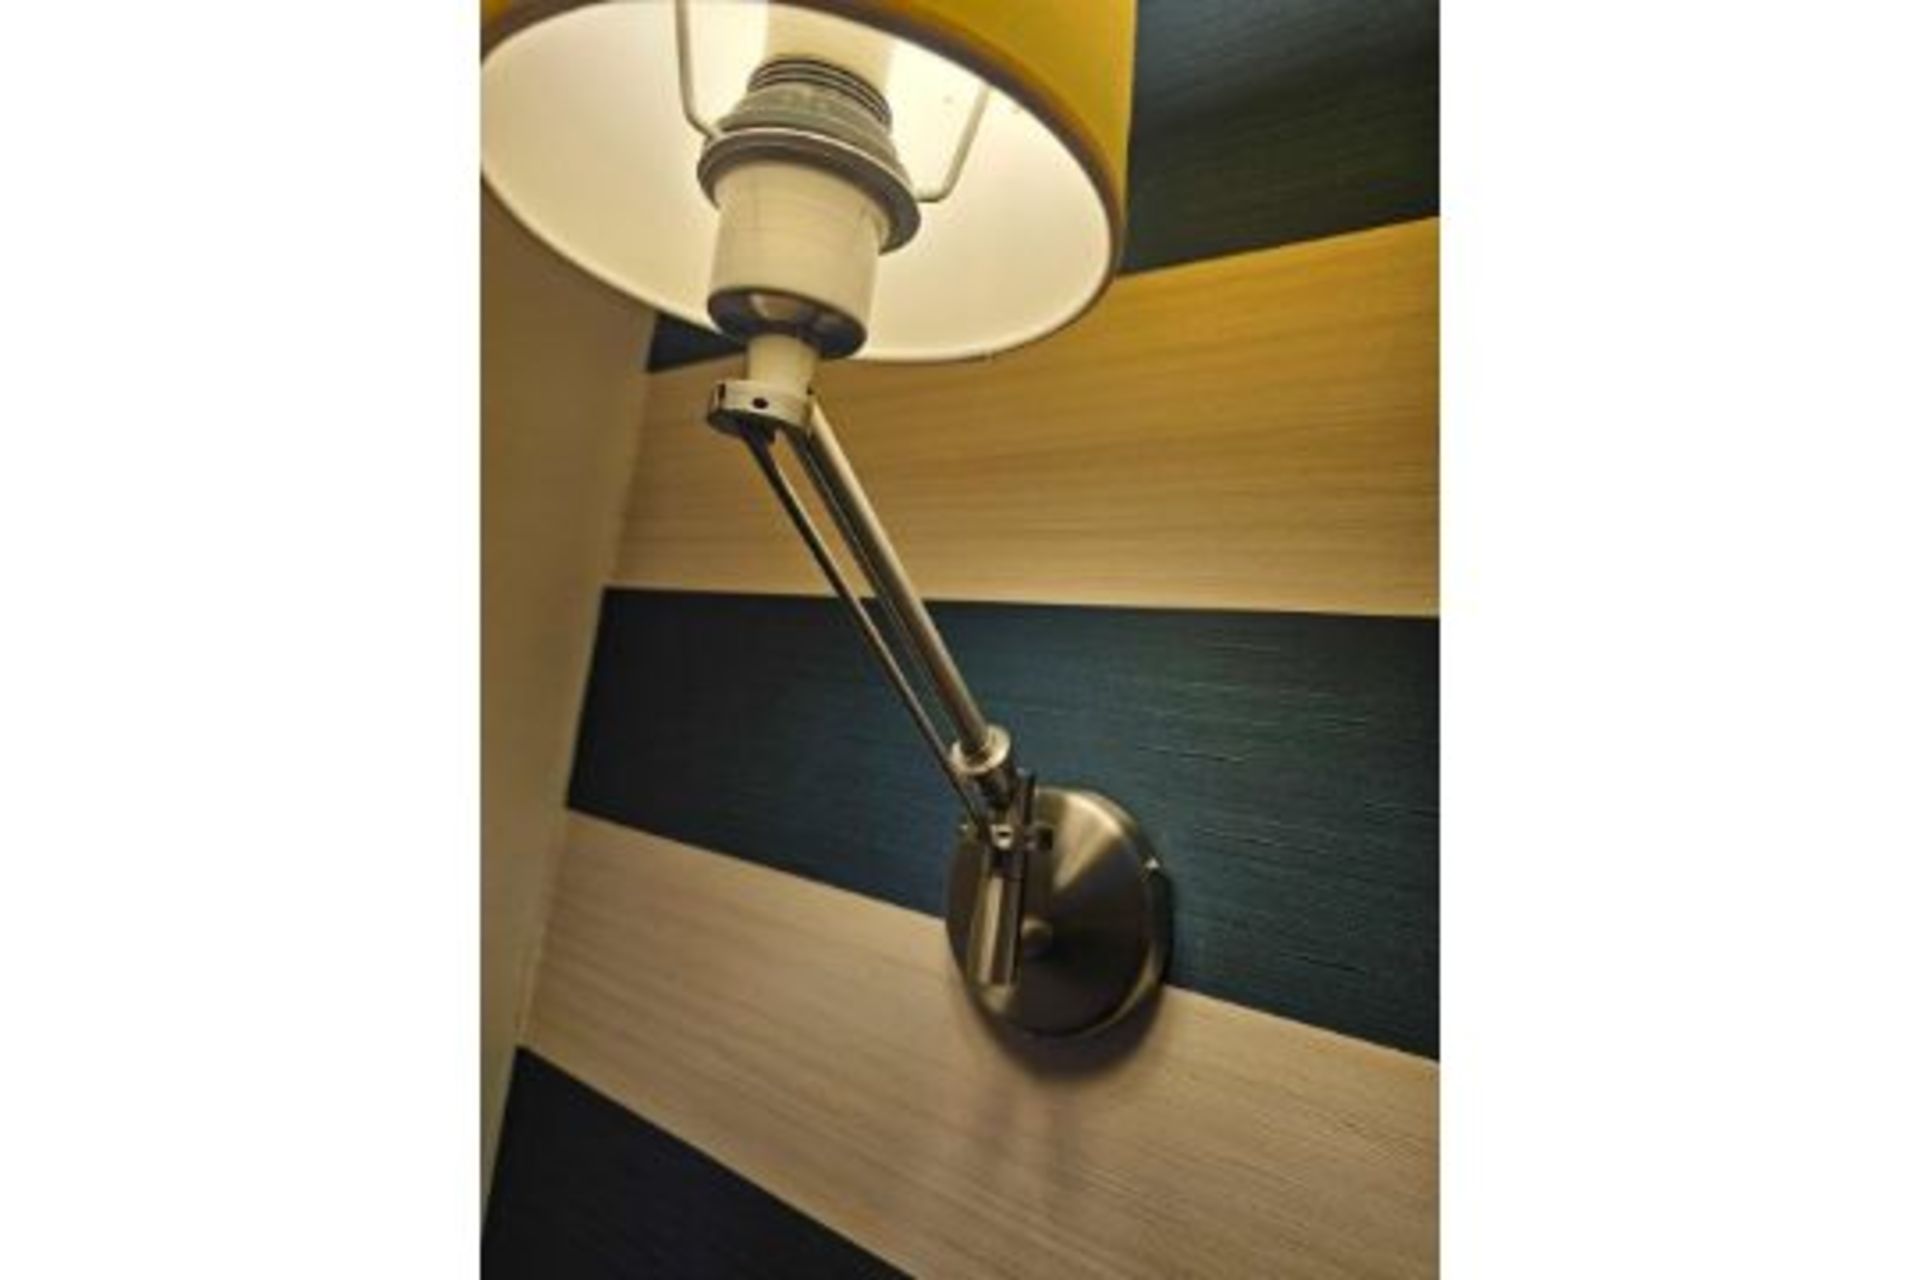 A Pair Of Chelsom Angle Al/52/W1/C Wall Lights In Polished Chrome Arms Swivel Left And Right - Image 2 of 2